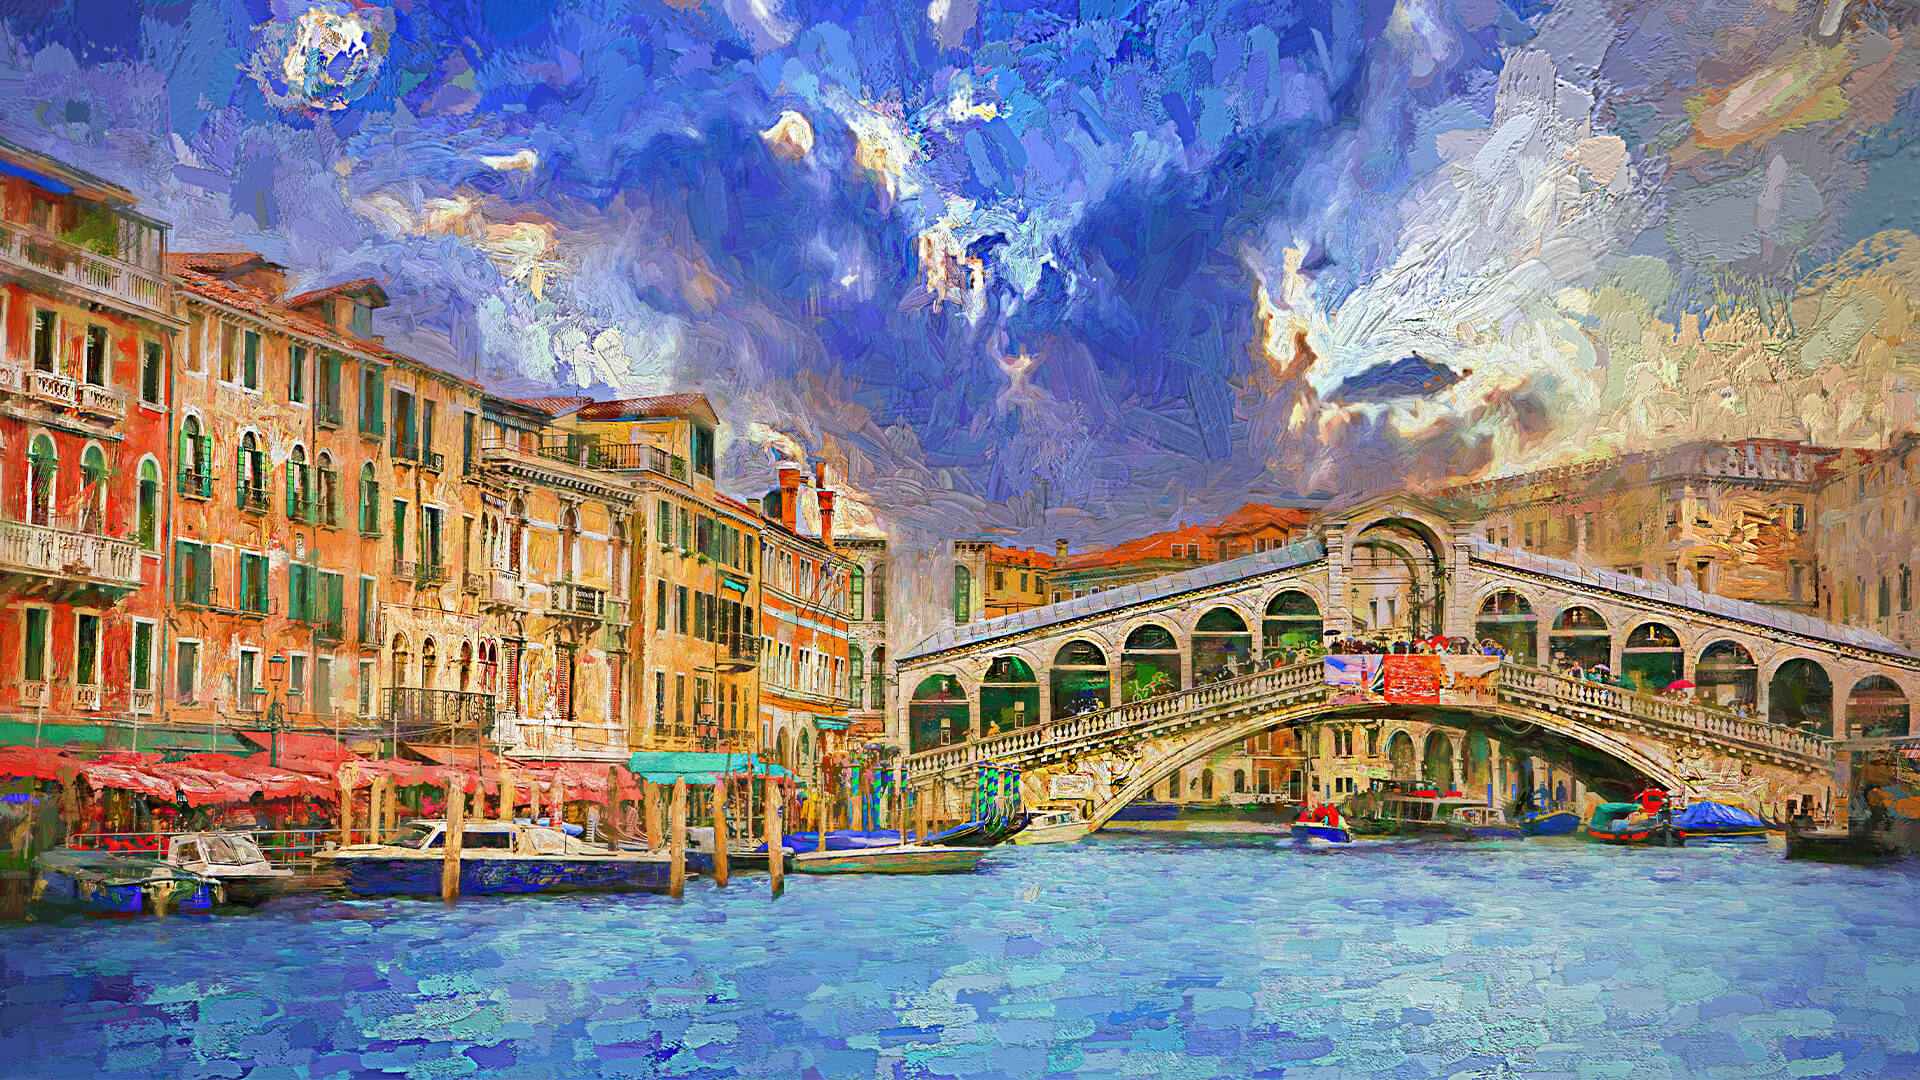 Oil painting of the canels of Venice